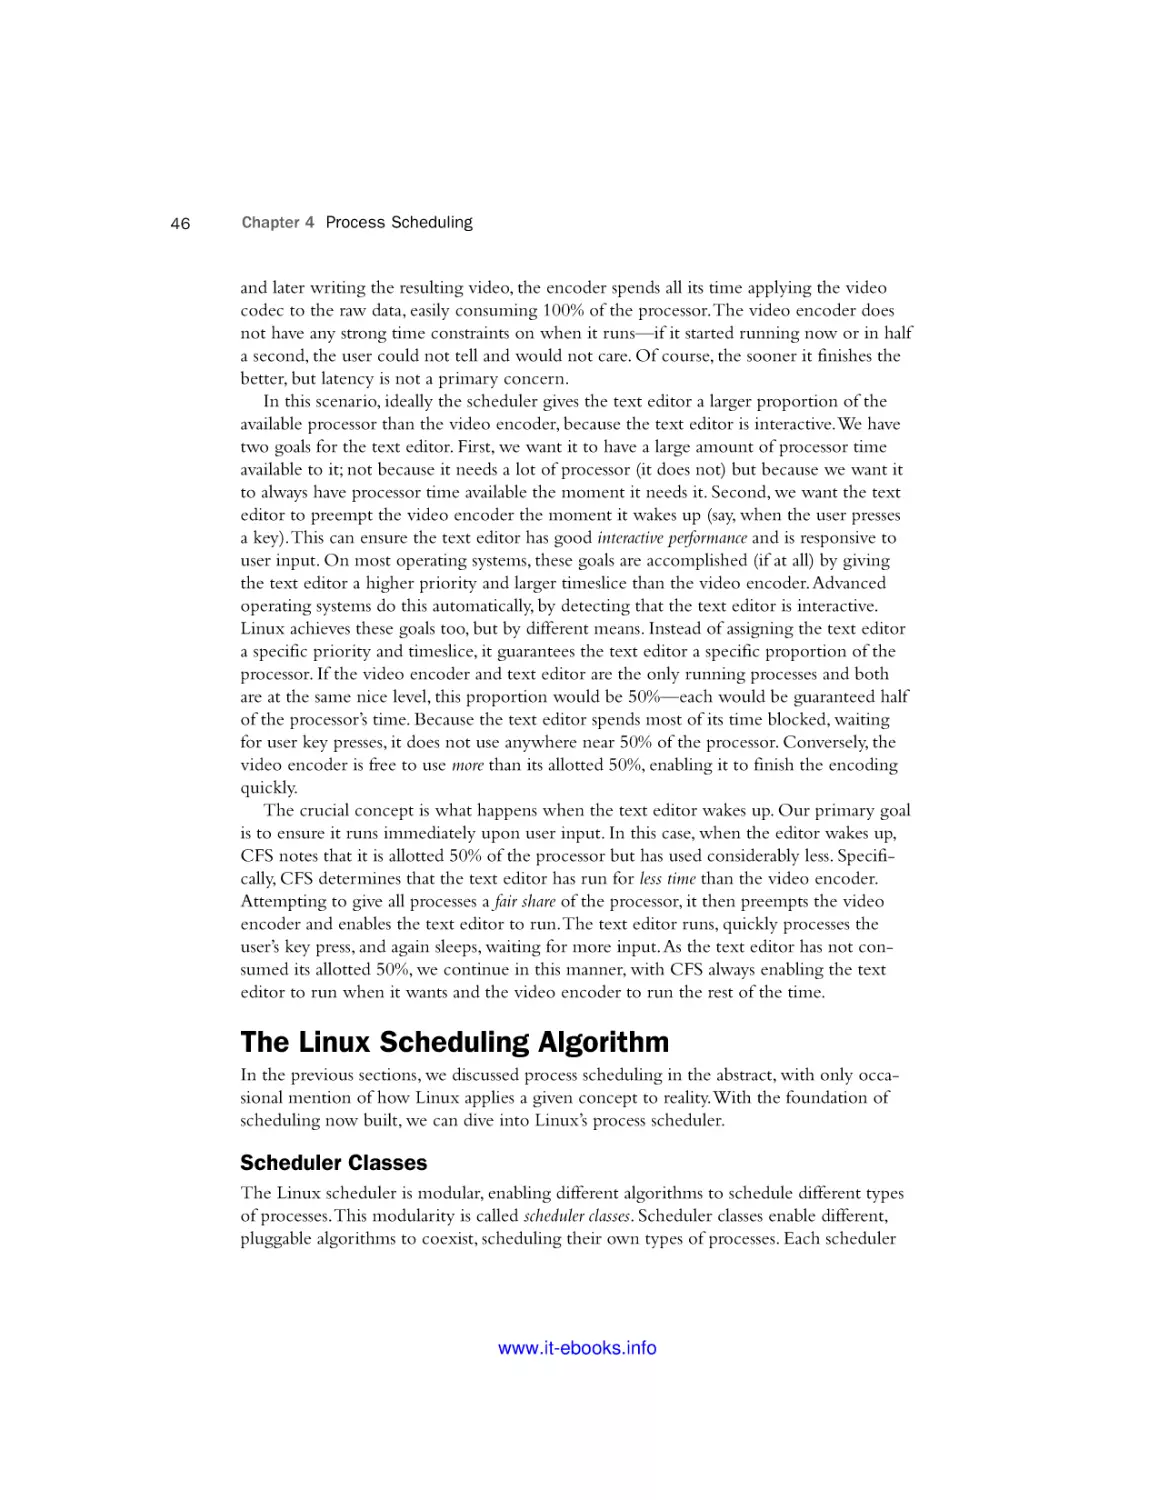 The Linux Scheduling Algorithm
Scheduler Classes